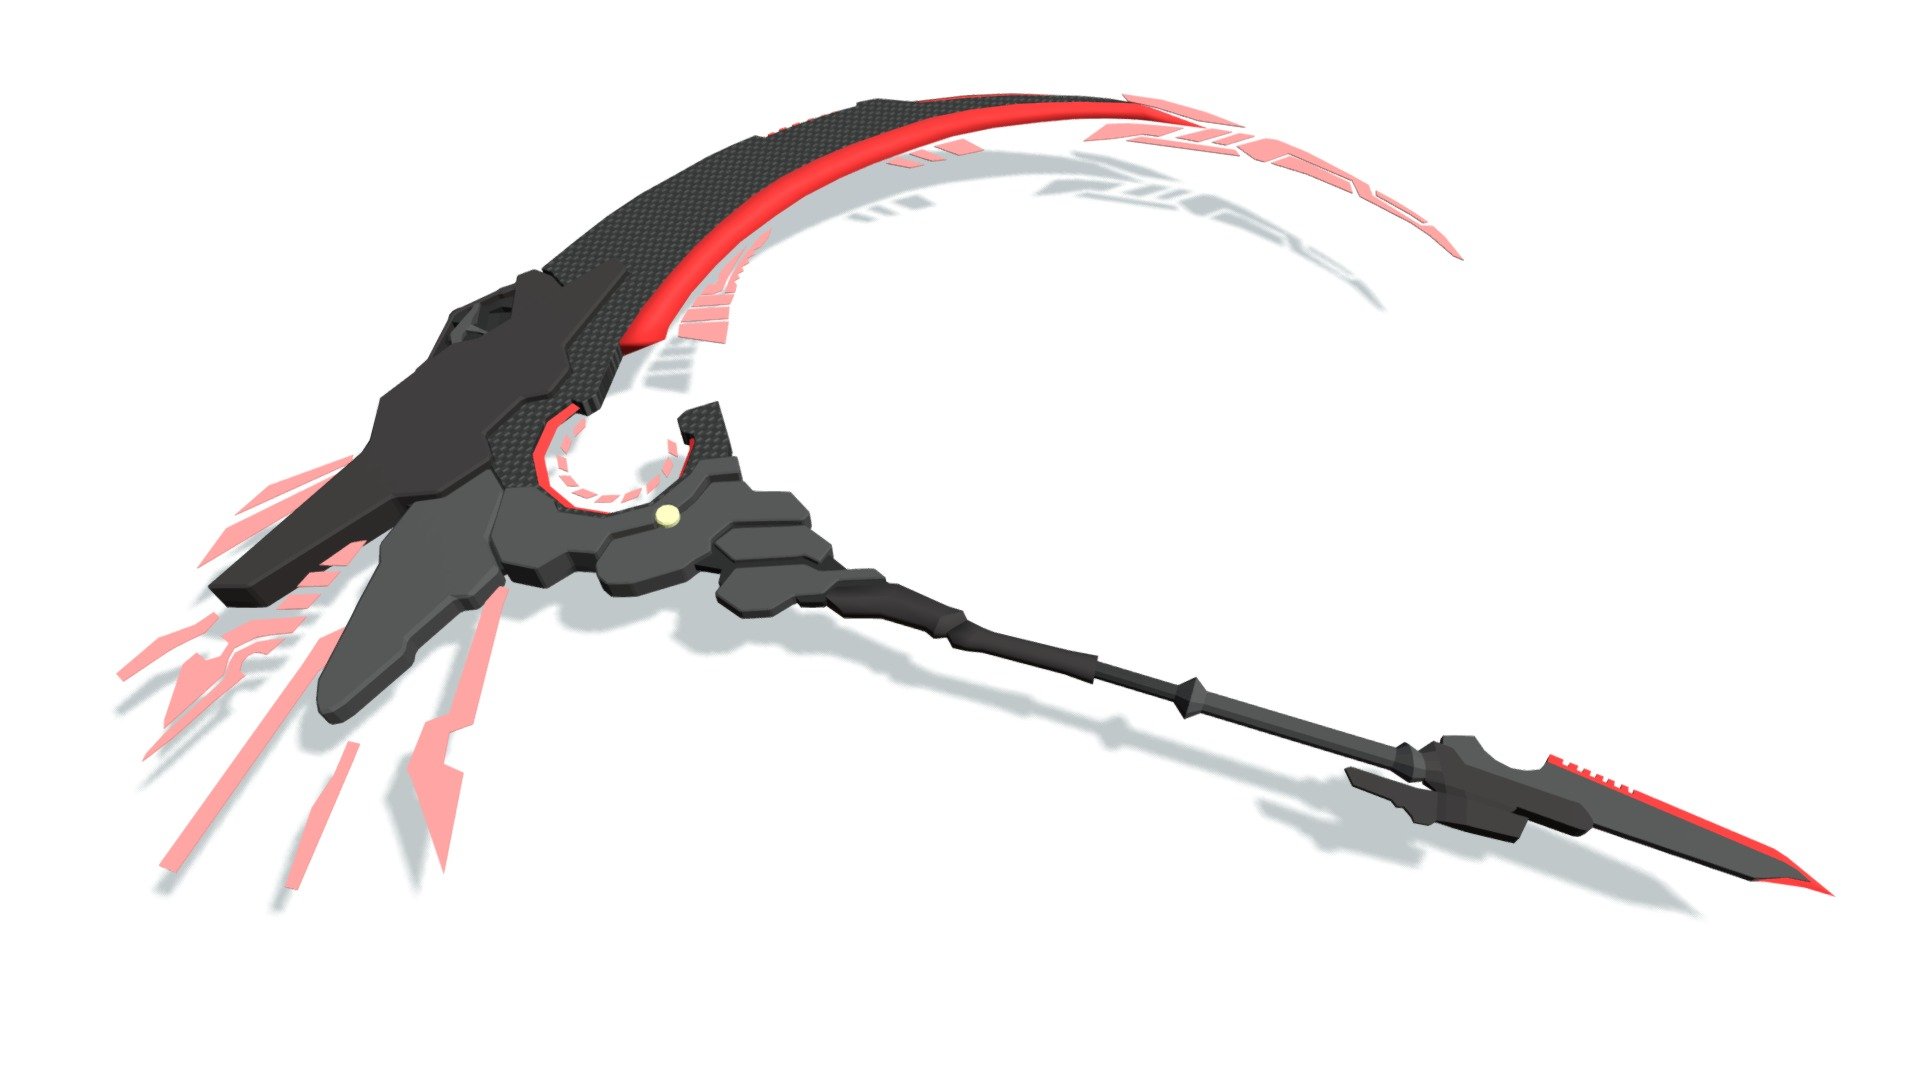 Why is the scythe an awesome weapon in anime but impractical in real life   Quora